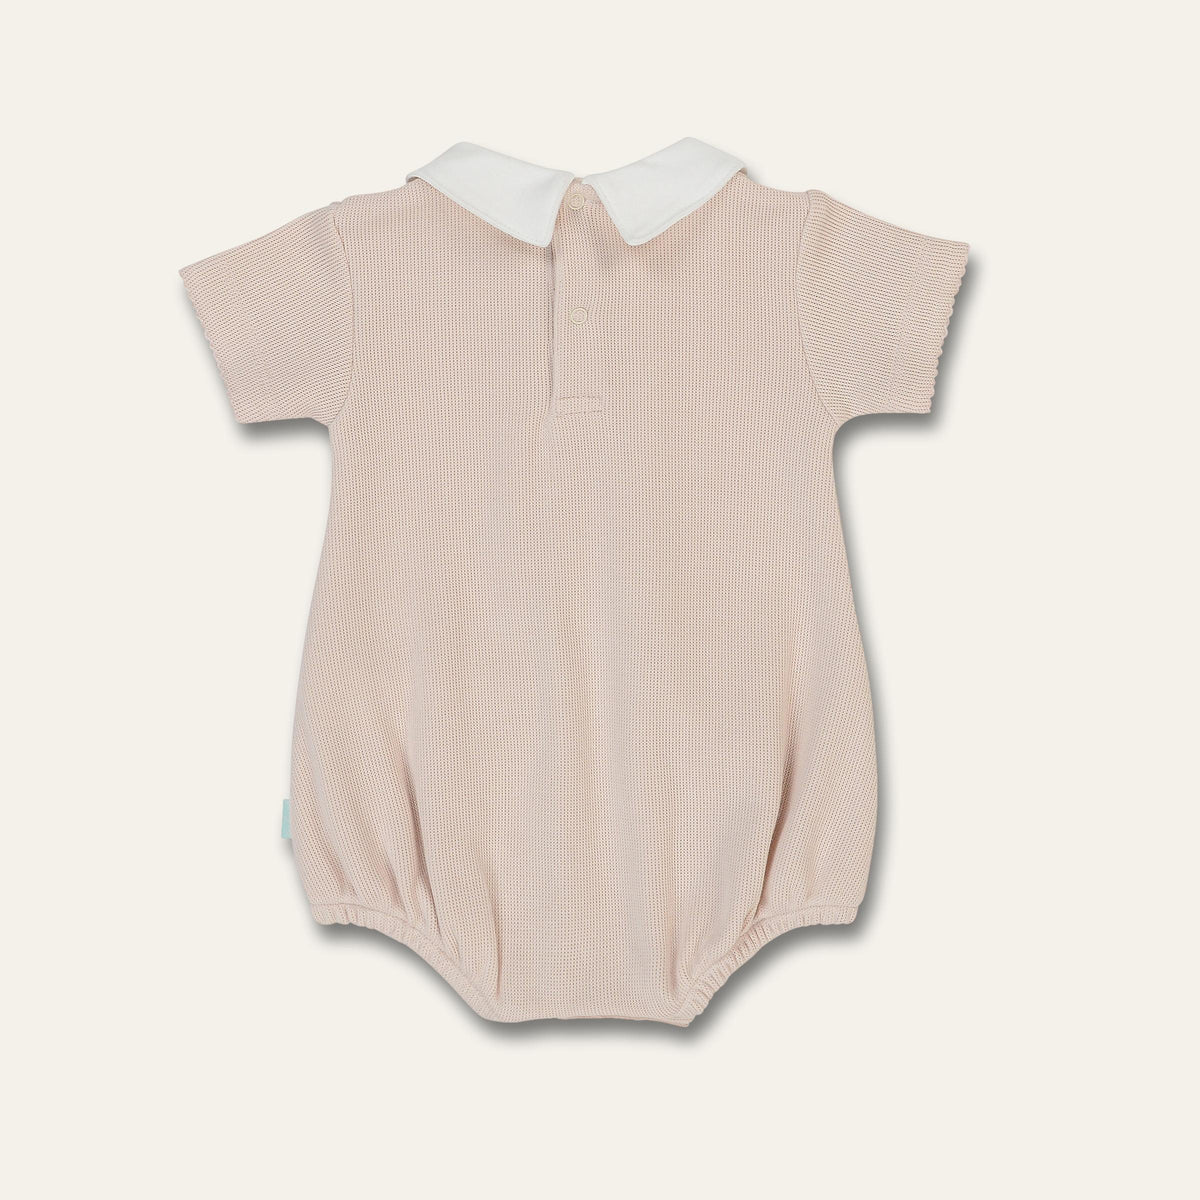 Boy's Bubble Romper with Shirt Collar